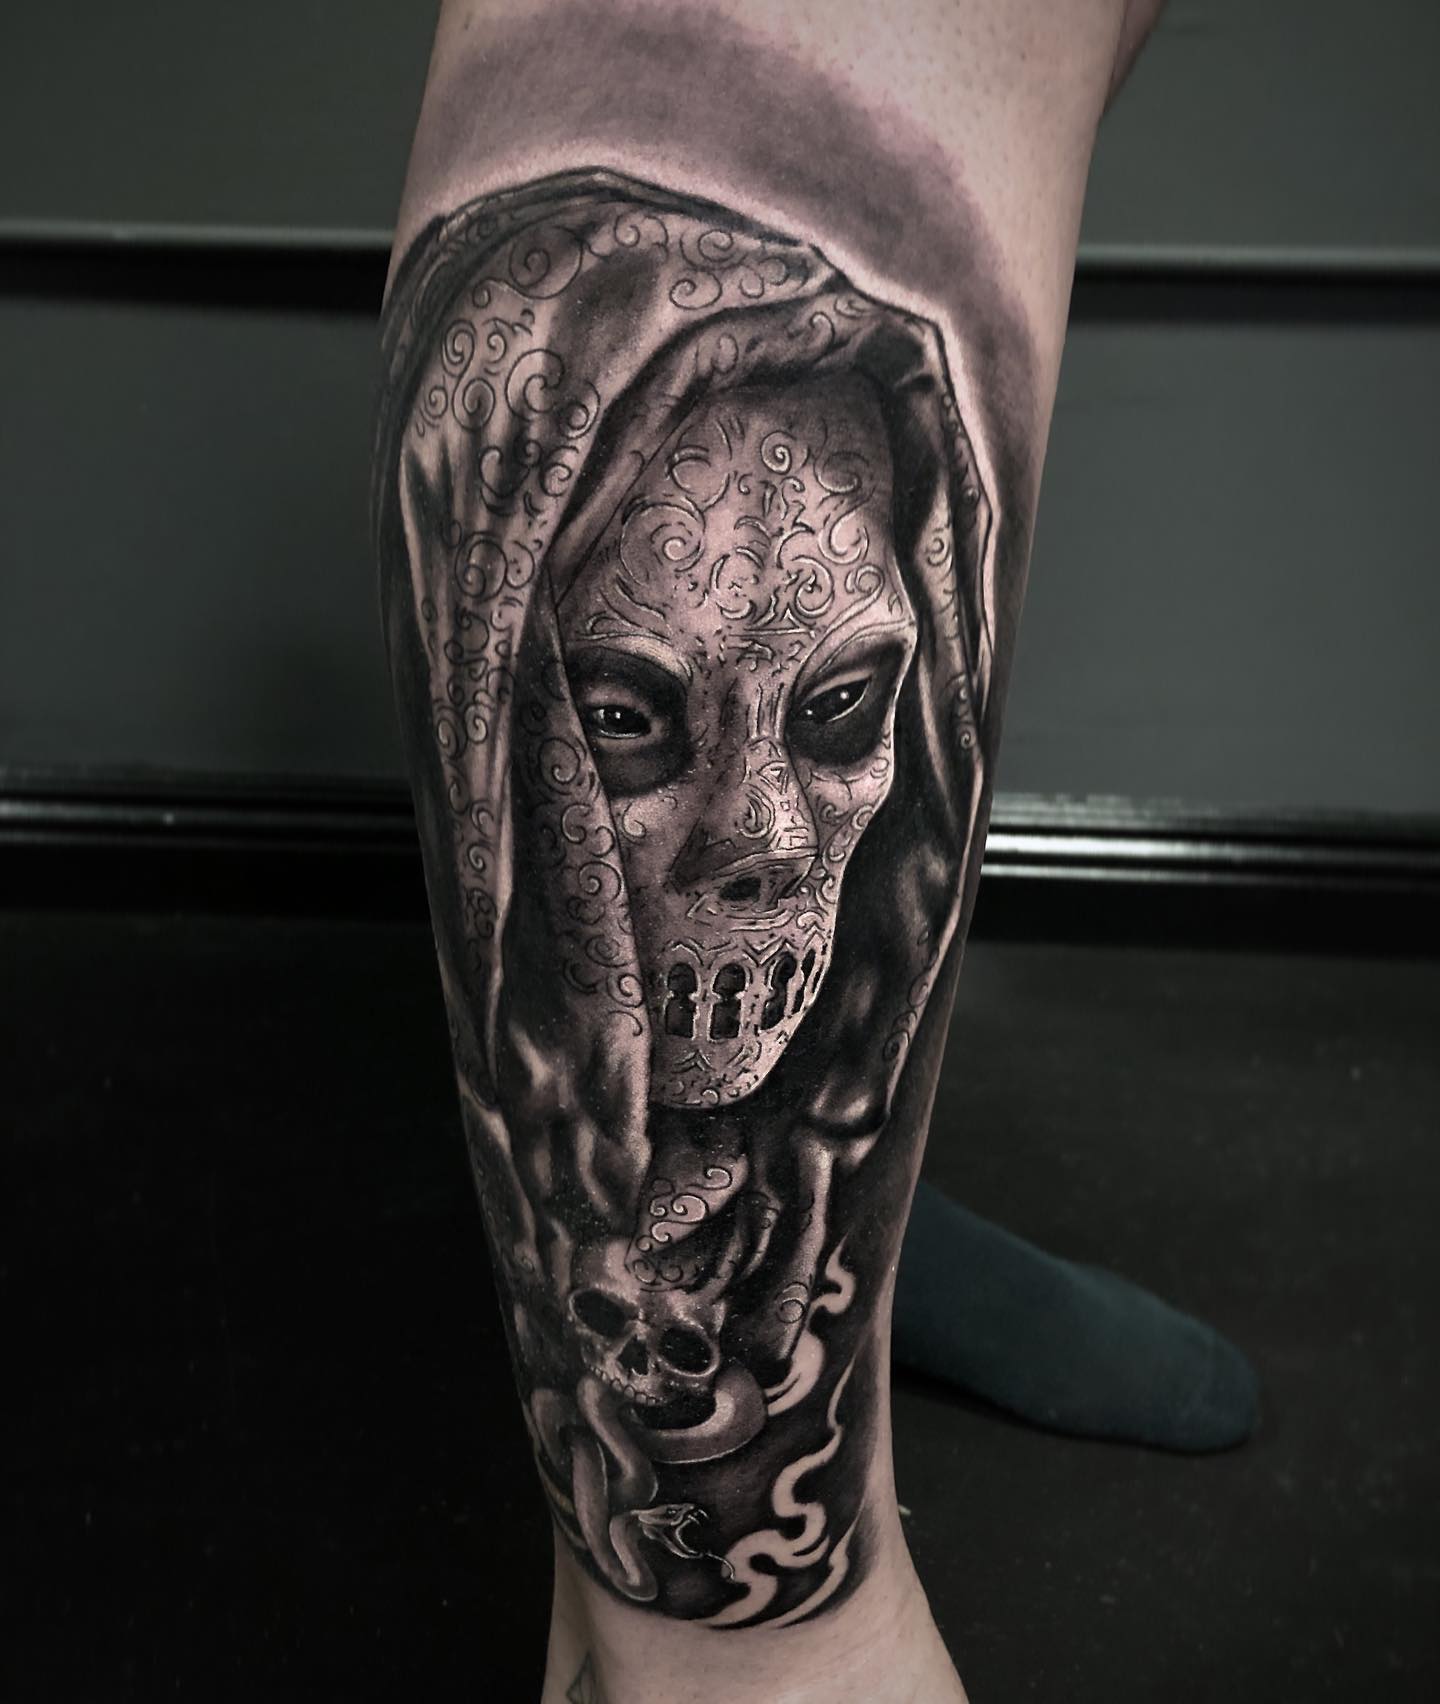 How does covering up your leg with a death eater tattoo sound like? The death eater above looks so real thanks to shading details and decorations on his face. To feel death eater vibe to the fullest, go for it.